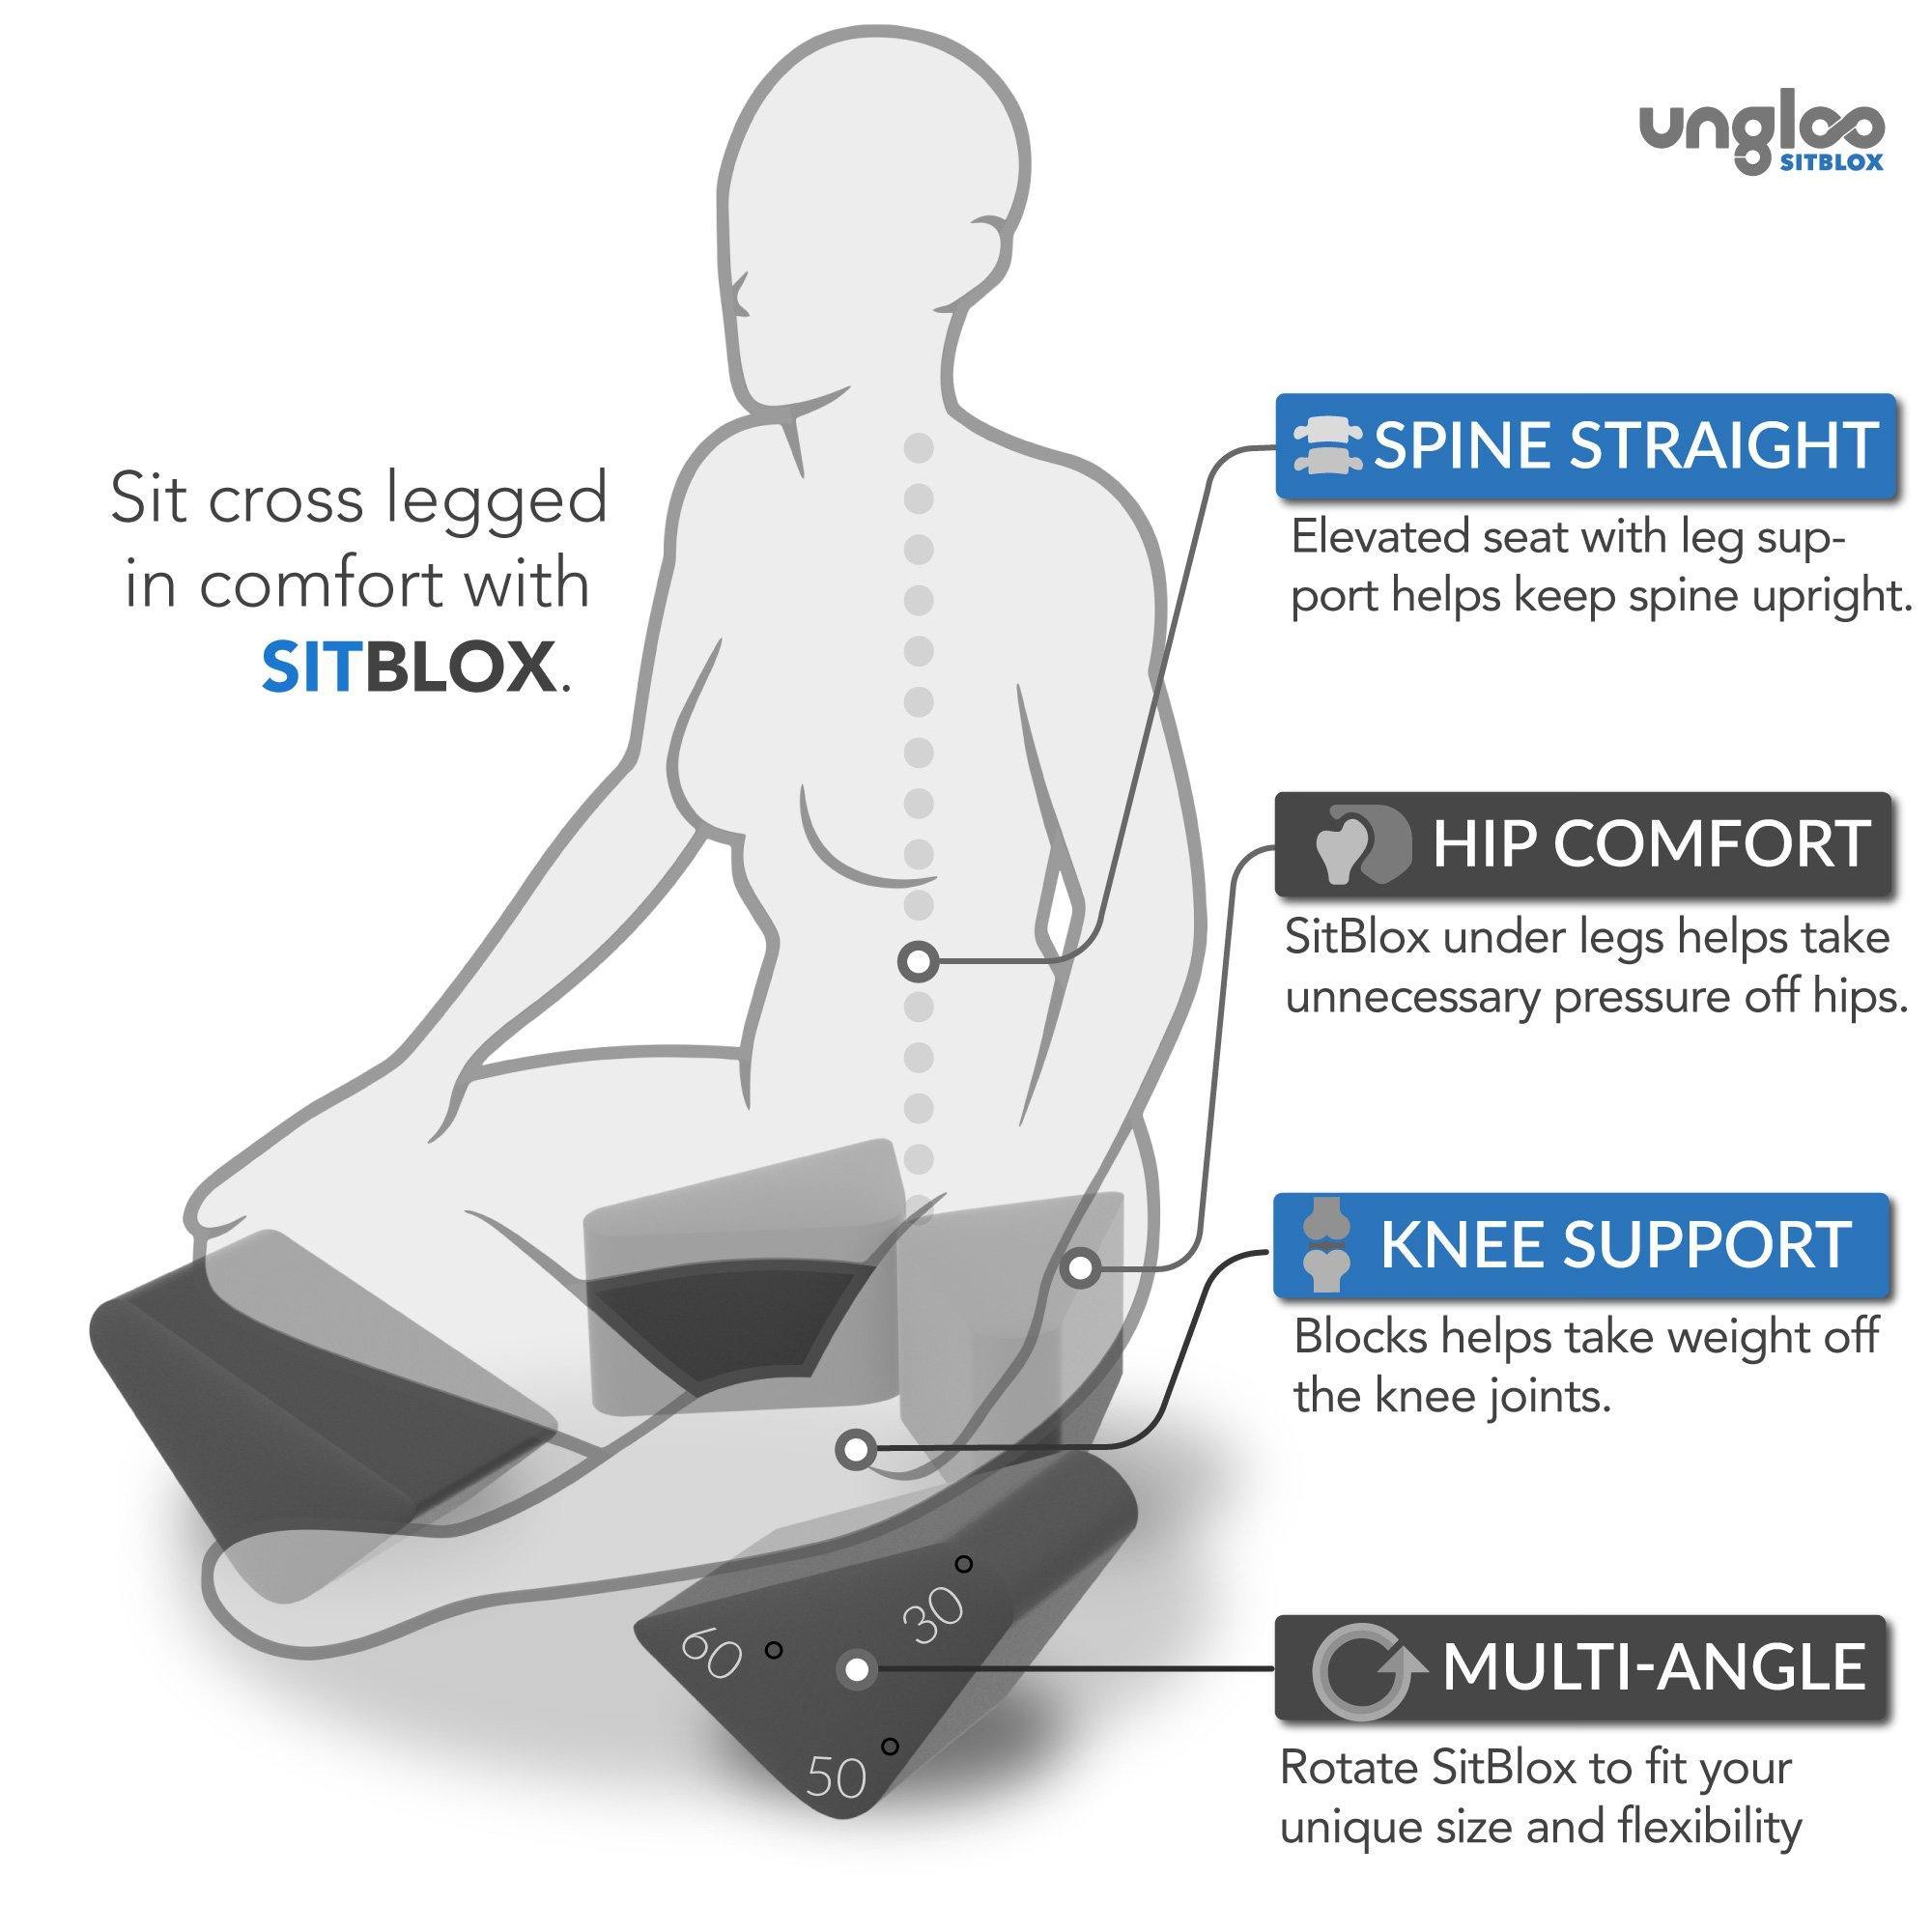 Graphic showing how the SitBlox help keep the spine straight and hips and knees comfortable during meditation.